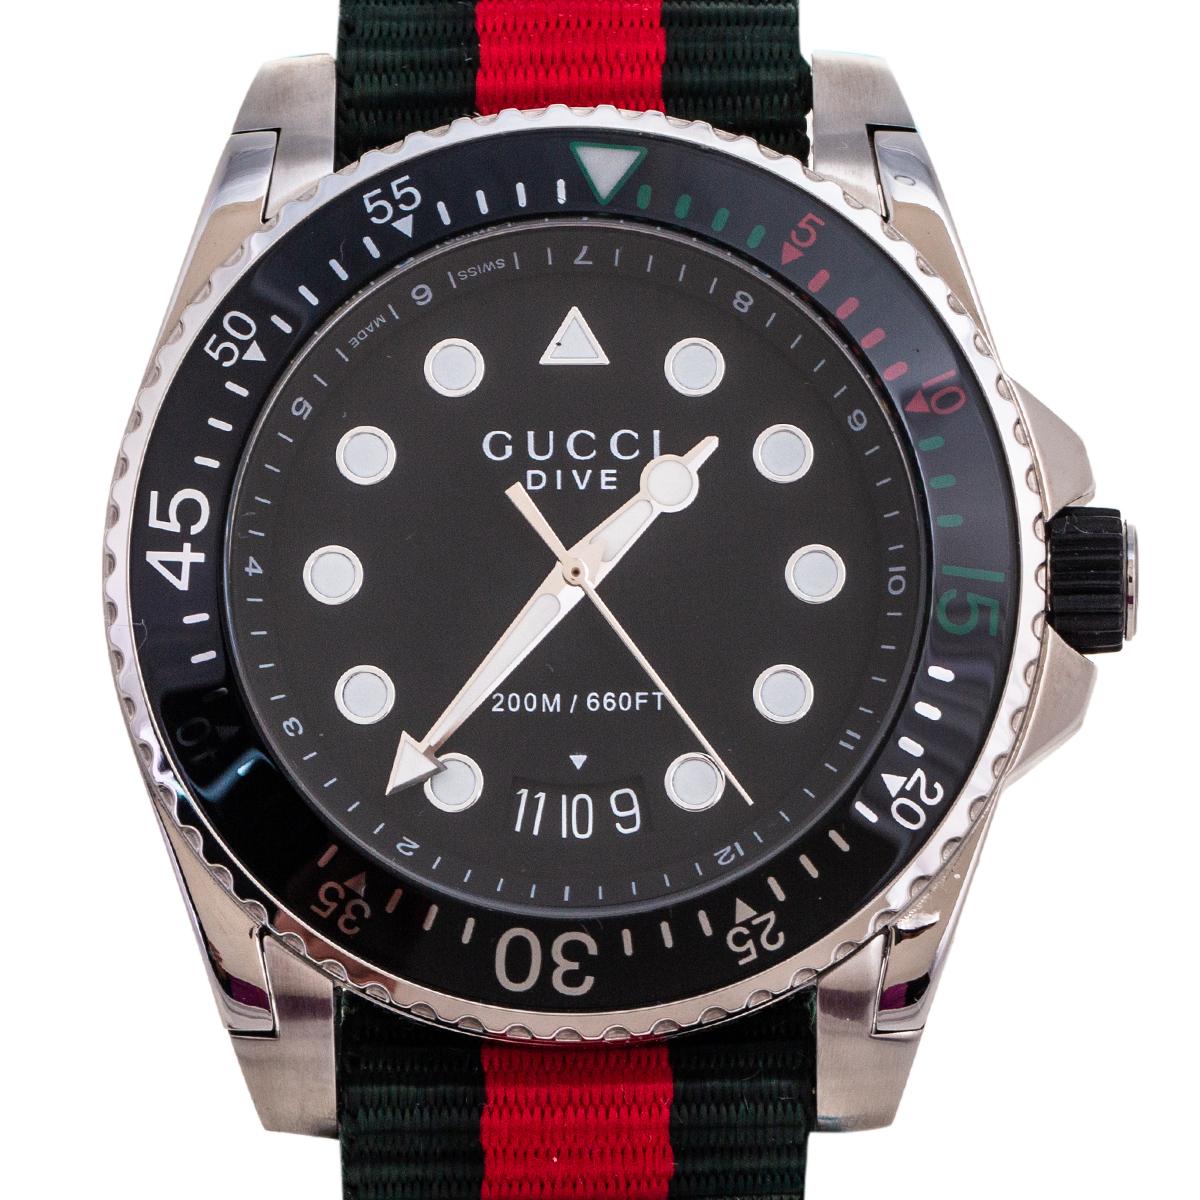 Make the right style choice with this Dive YA136206 timepiece from Gucci. Swiss-made, the watch has a stainless steel case held by Web nylon straps. It has a quartz movement and carries a black dial set with distinct markers, three hands, and a date